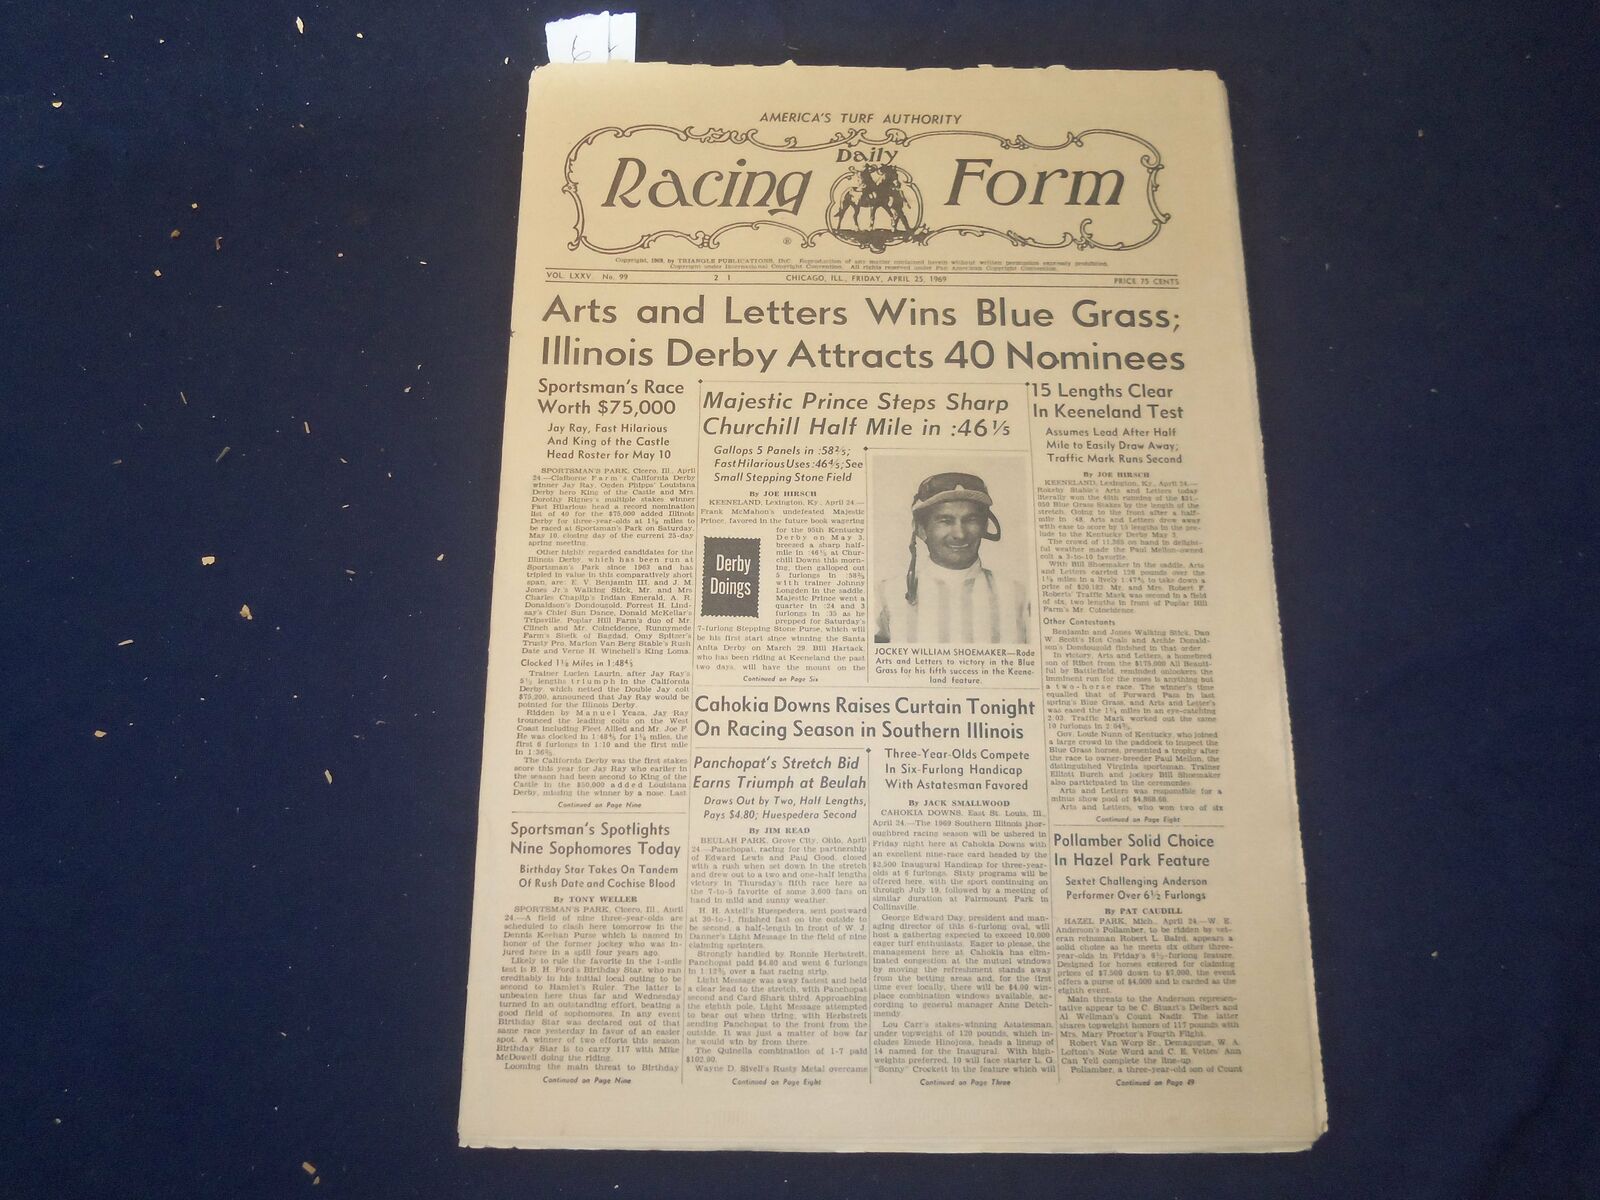 1969 APRIL 25 THE DAILY RACING FORM -ARTS AND LETTERS WINS BLUE GRASS - NP 2534G